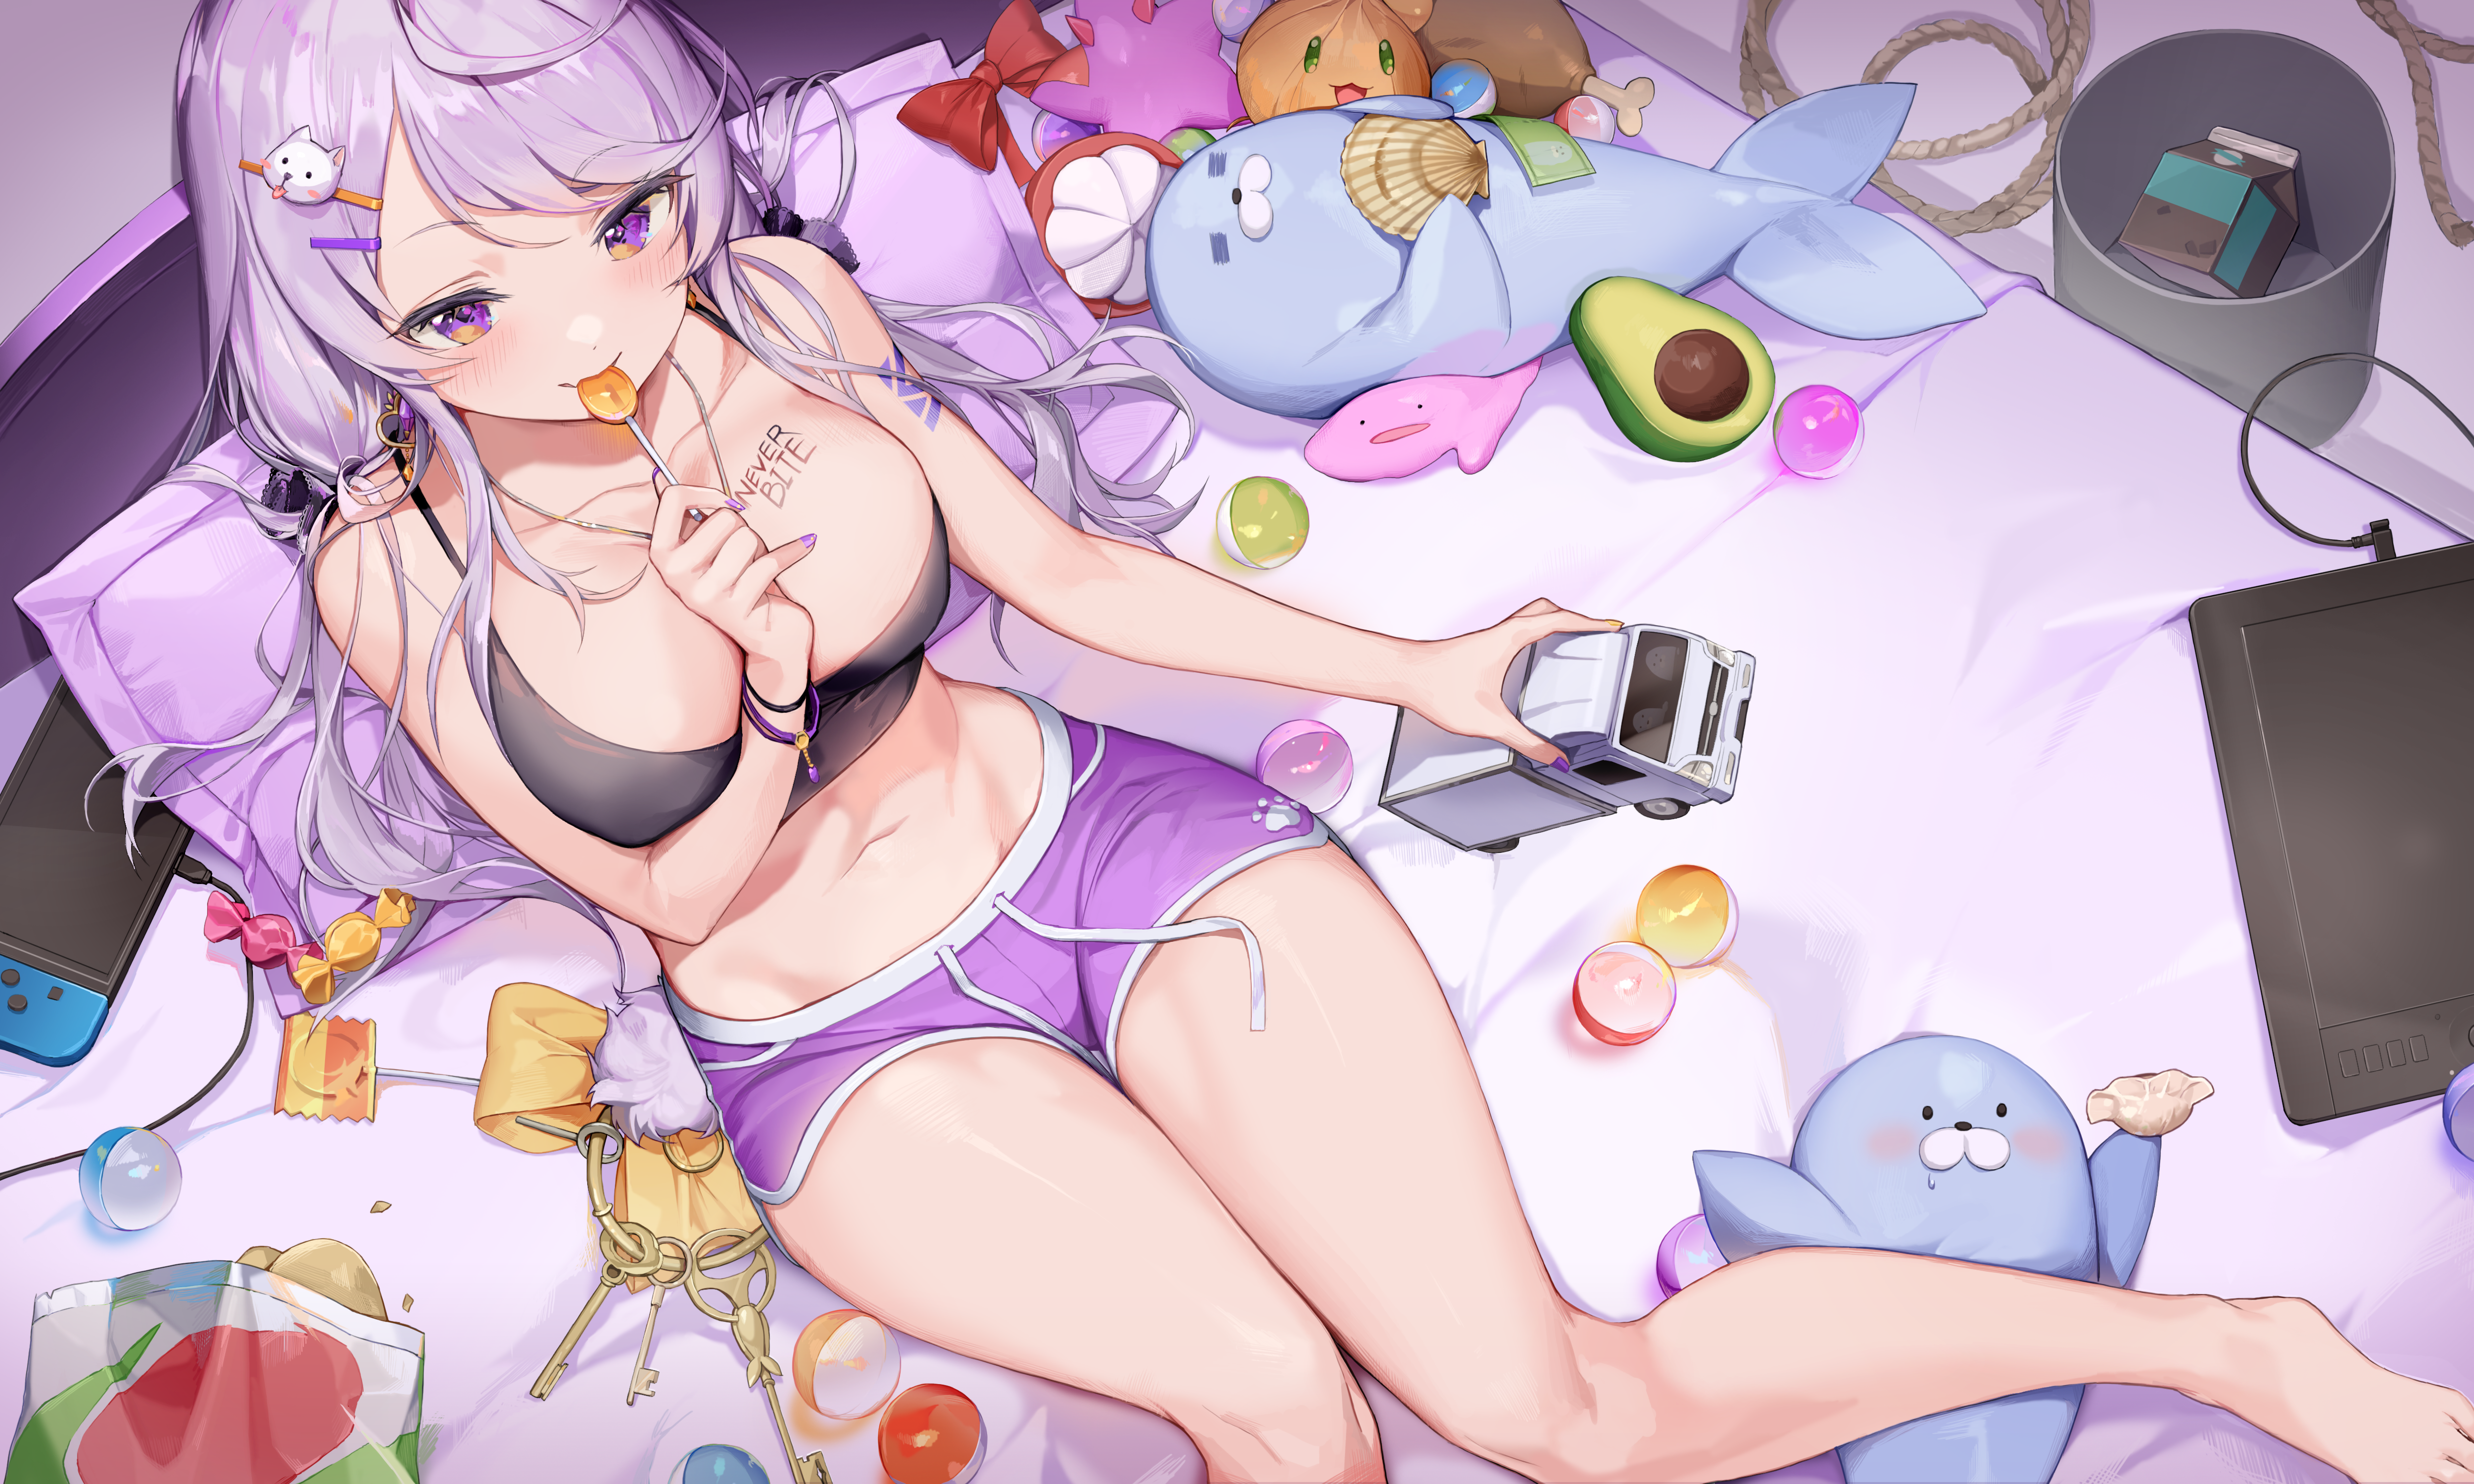 Anime 5000x3000 anime anime girls cleavage Dolphin shorts original characters Chyo Nintendo Switch consoles indoors women indoors Avocado looking at viewer hair ornament camisole collarbone big boobs purple hair purple eyes in bed bed lollipop lying down stuffed animal toys multi-colored eyes keys condom pillow long hair legs belly bedroom messy bright